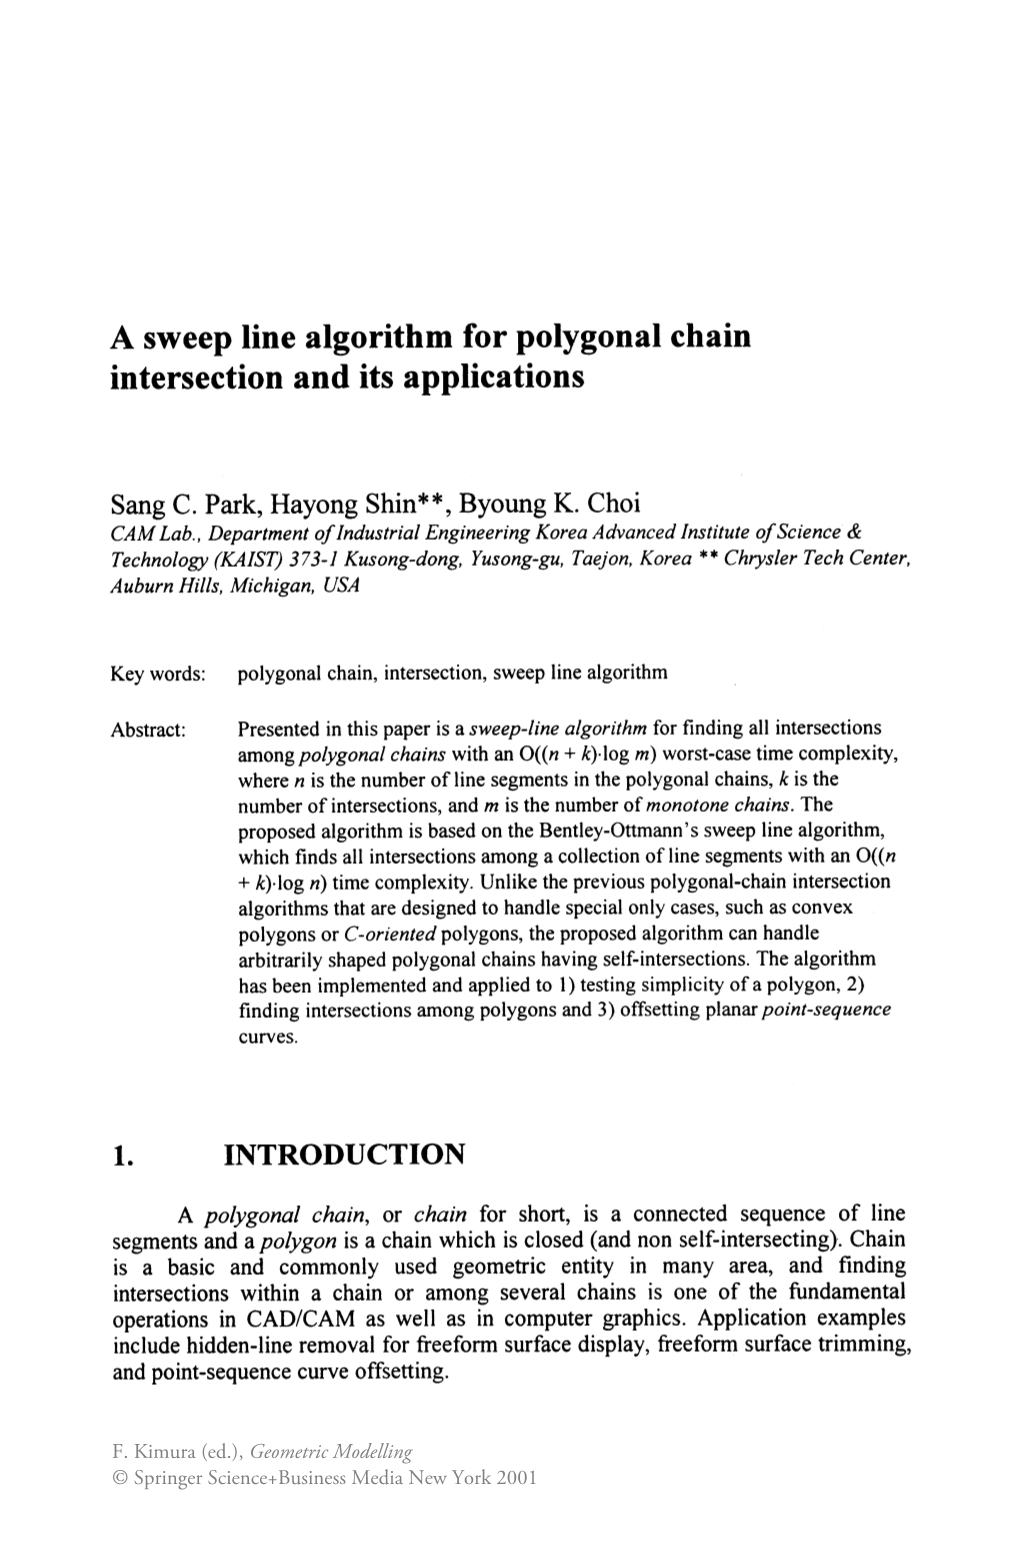 A Sweep Line Algorithm for Polygonal Chain Intersection and Its Applications